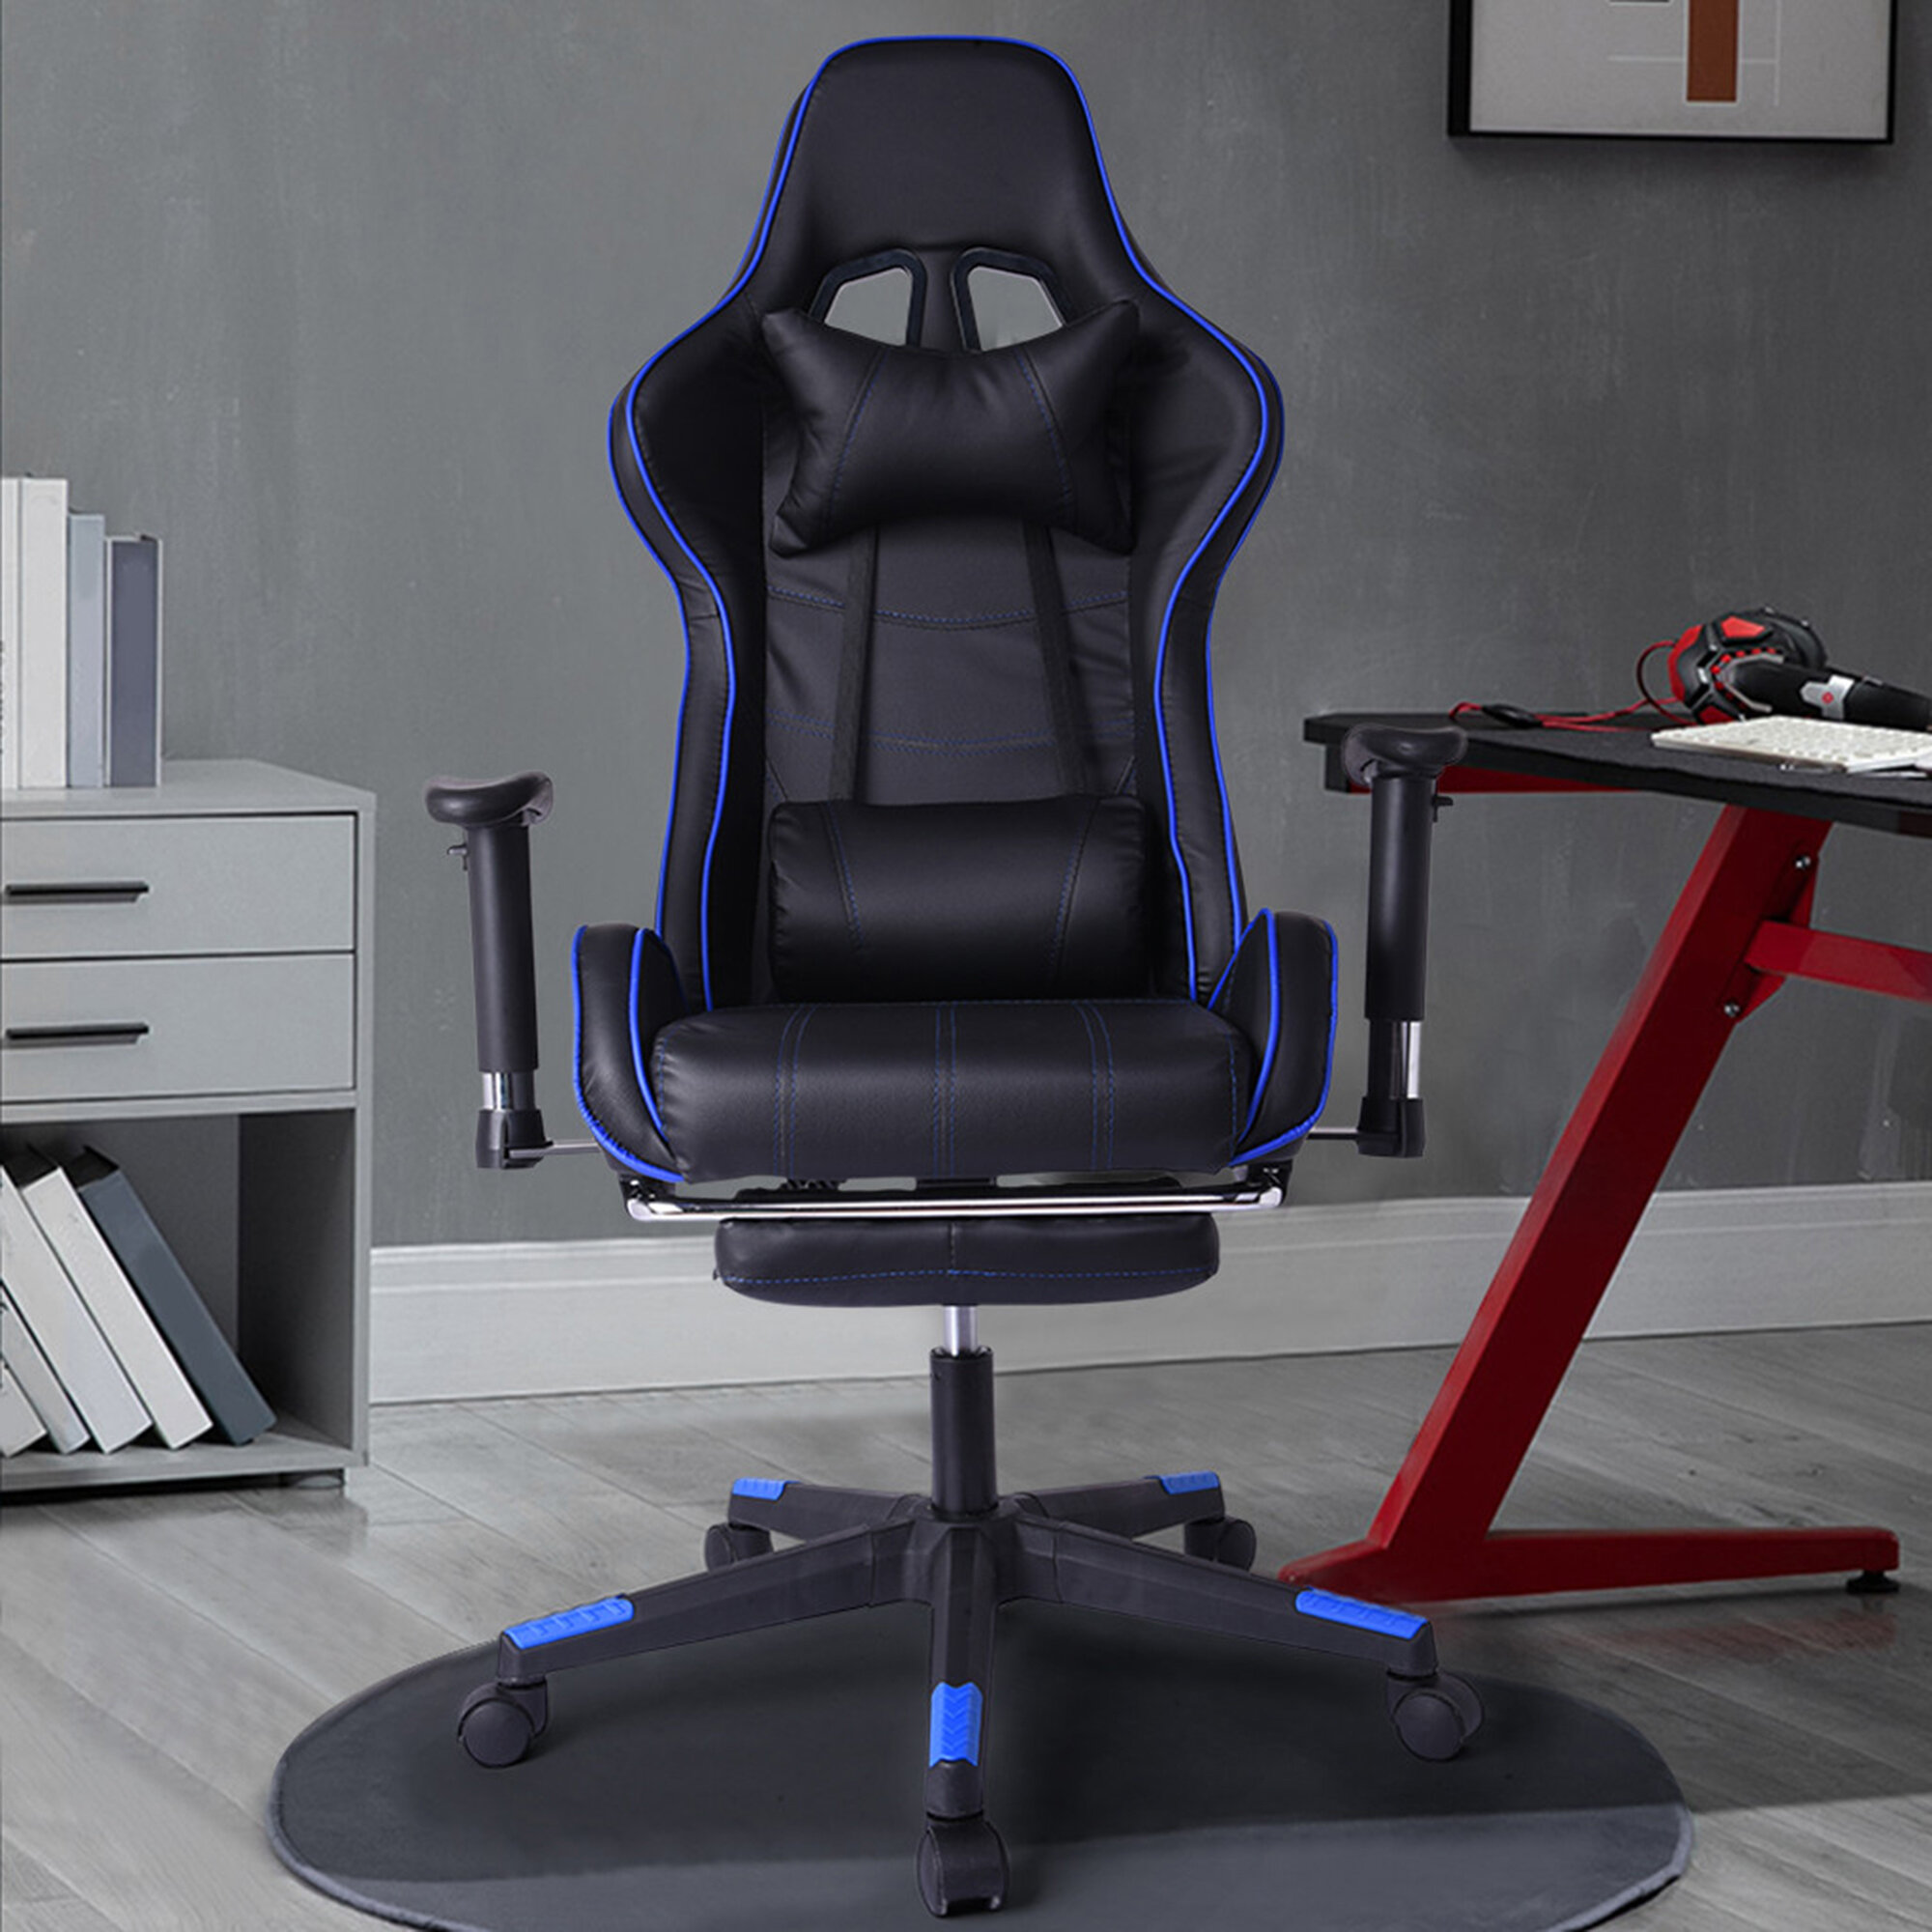 400 LBS GAMING CHAIR COMPUTER LEATHER HIGH BACK RECLINER OFFICE footrest blue PC 